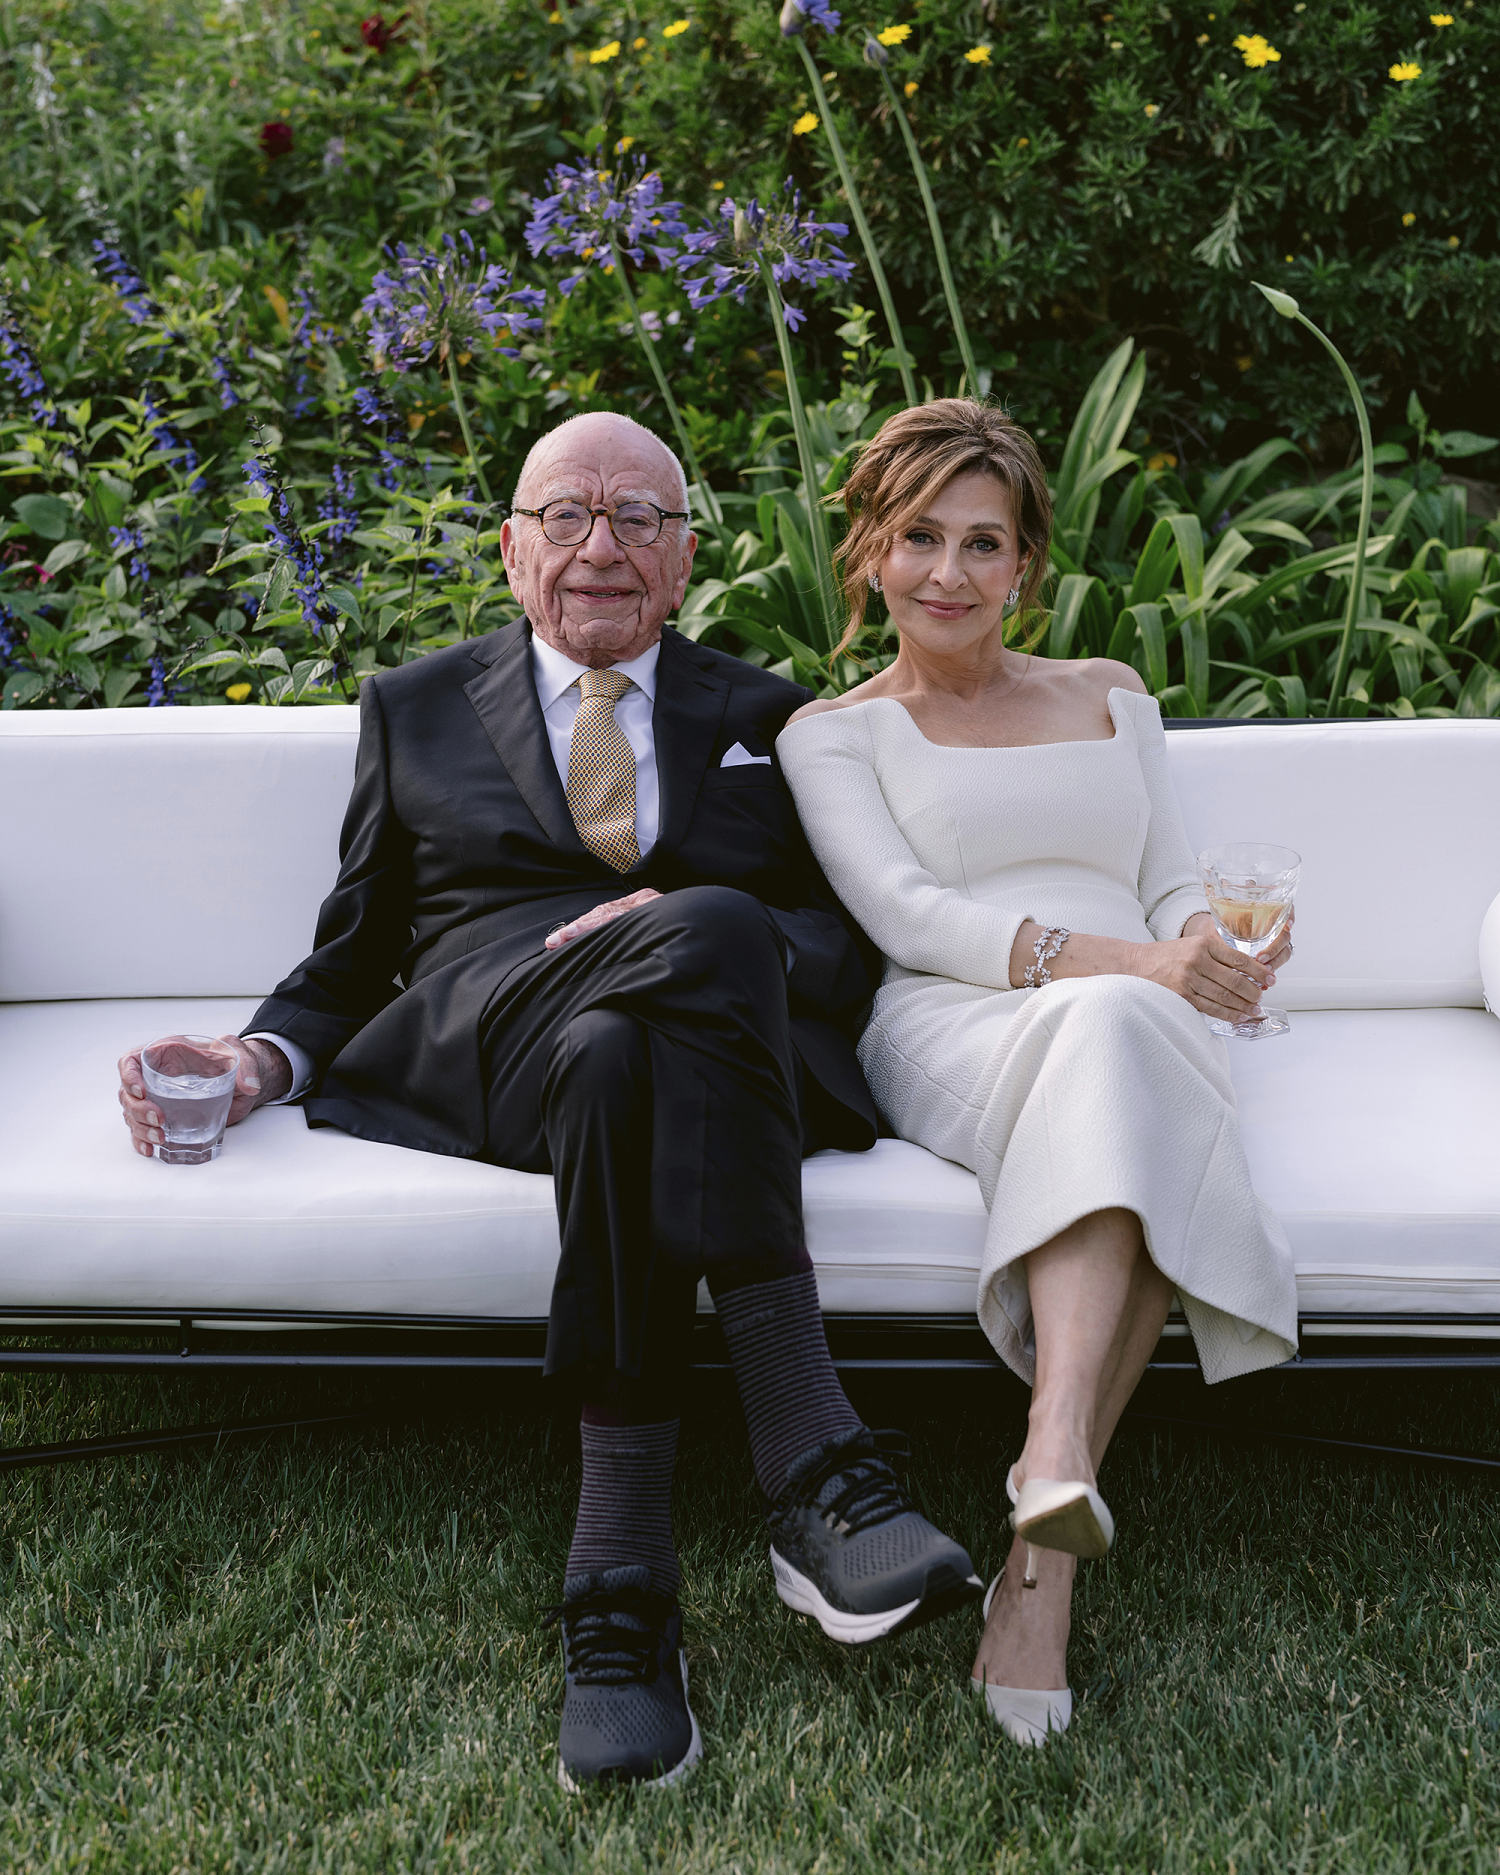 Rupert Murdoch ties the knot for the 5th time in ceremony at his California vineyard